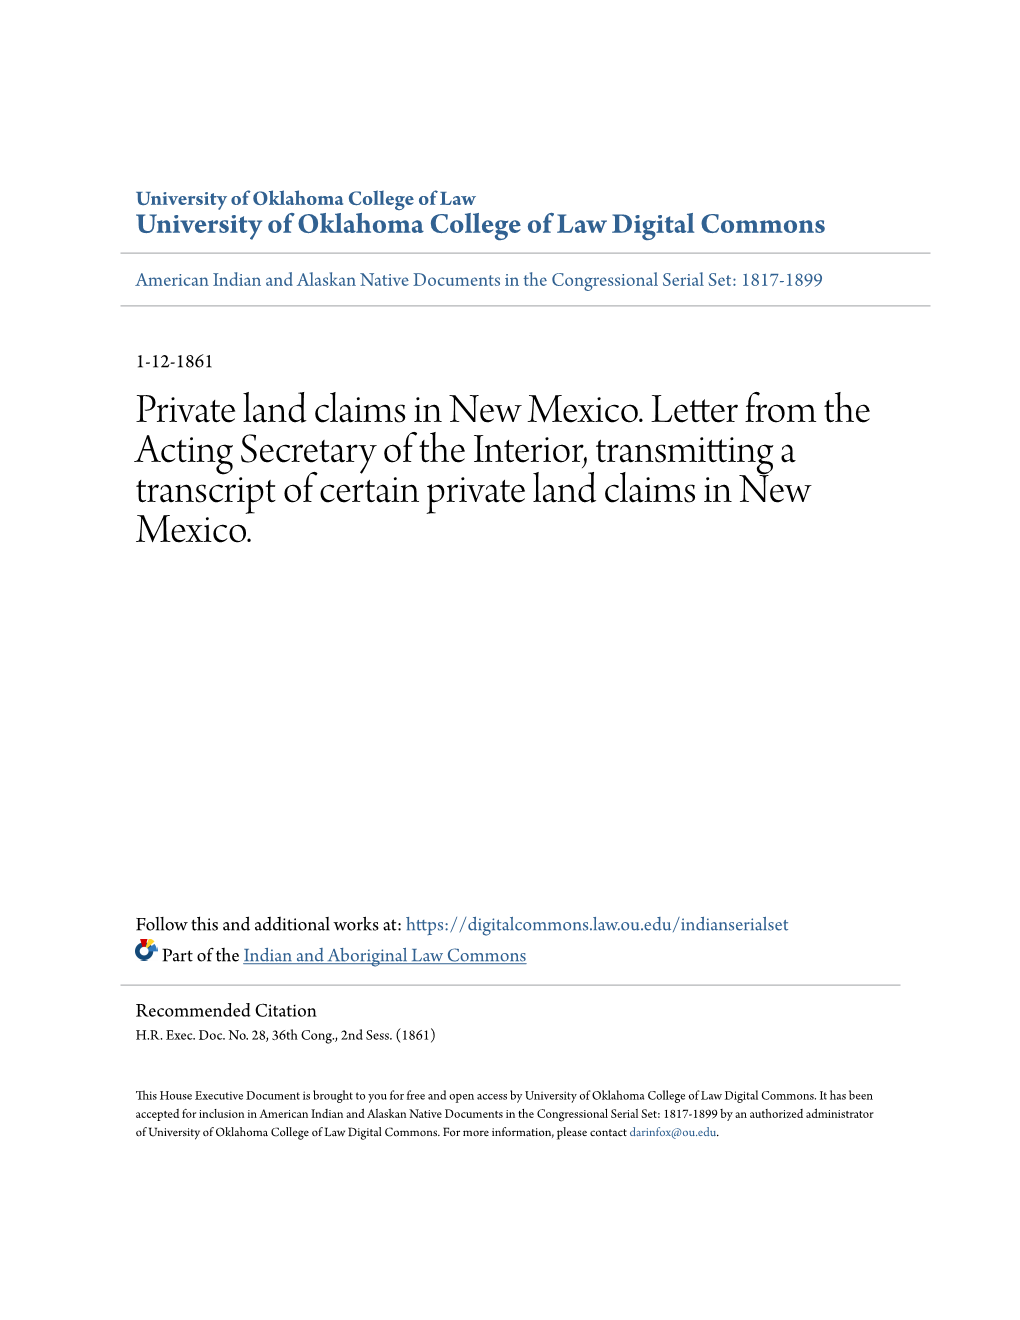 Private Land Claims in New Mexico. Letter from the Acting Secretary of the Interior, Transmitting a Transcript of Certain Private Land Claims in New Mexico